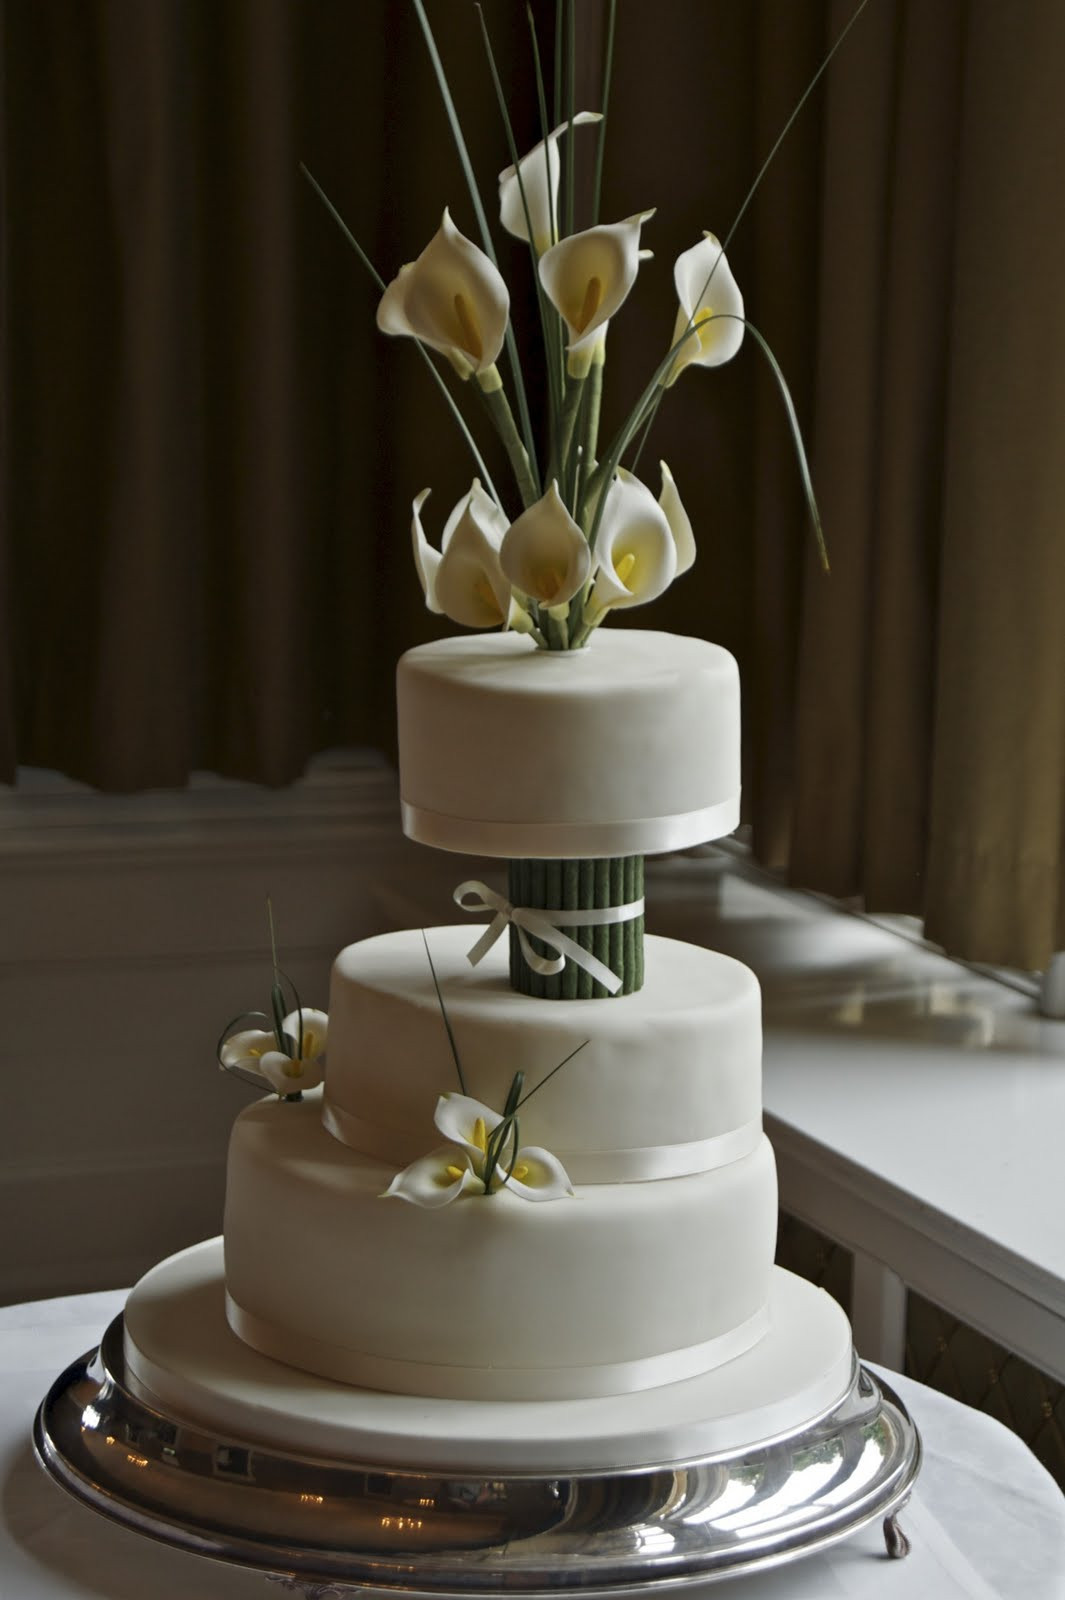 Wedding Cakes With Calla Lilies
 REAL LIFE Ivory calla lily wedding cake